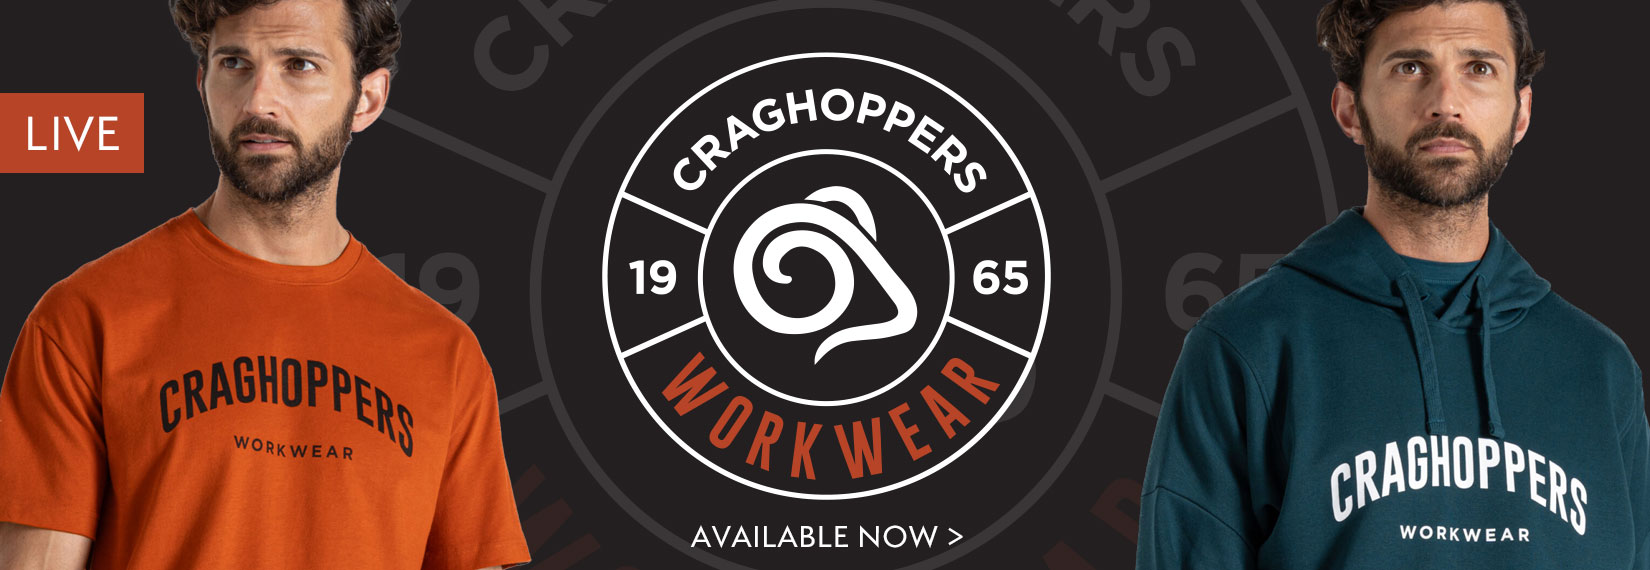 Craghoppers Workwear